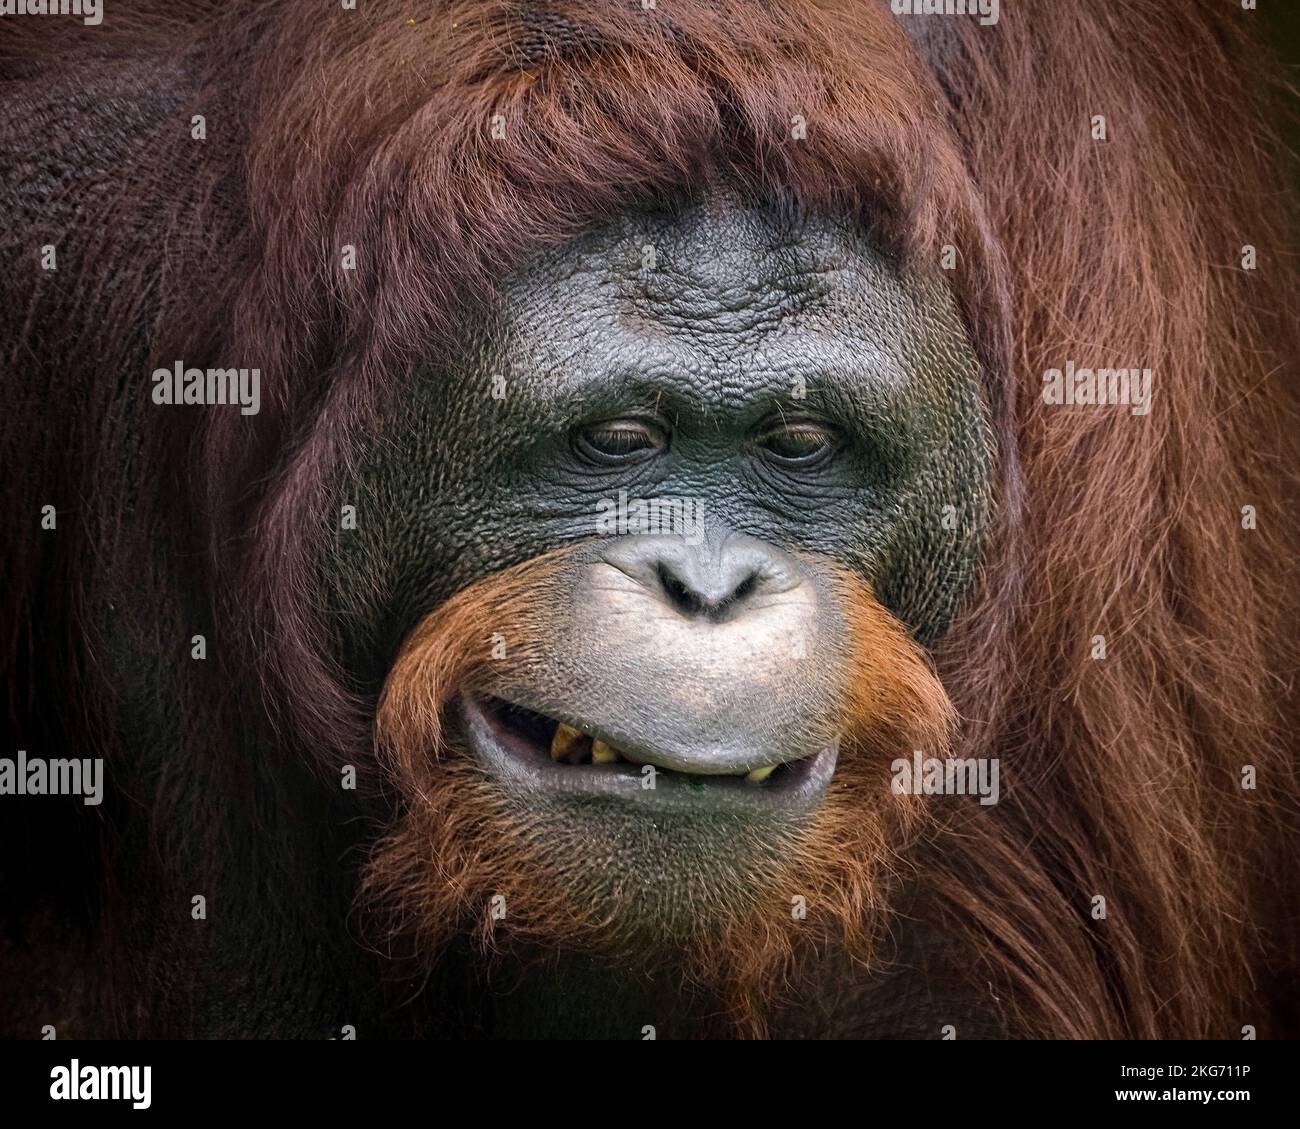 This orangutan pulls a funny face for the photographer. Jakarta, Indonesia: THESE FUNNY photos show an orangutan pulling silly faces for a delighted p Stock Photo